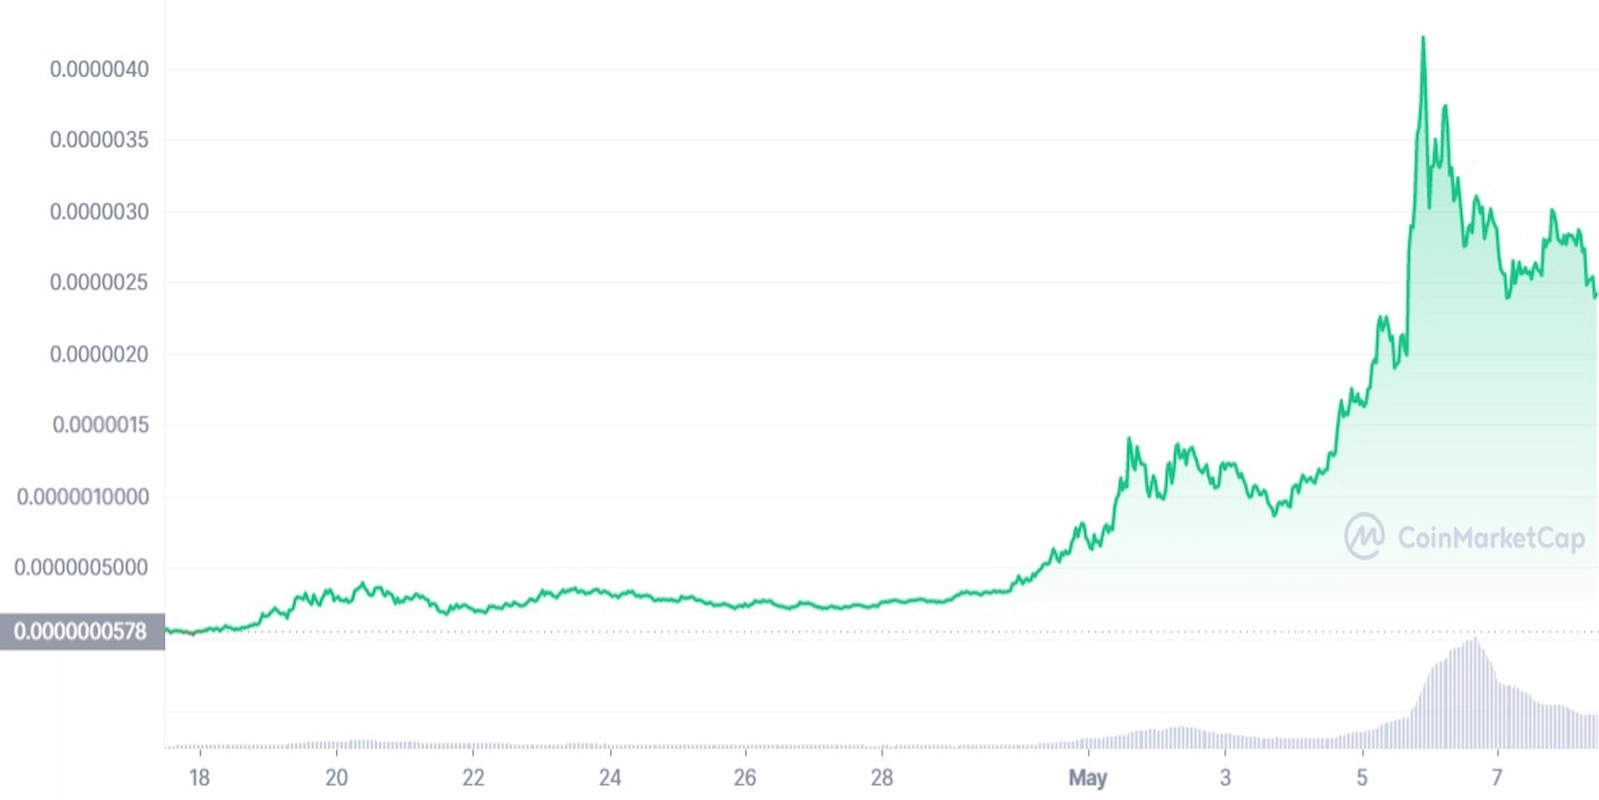 PEPE coin price formed a new ATH within days of its previous record